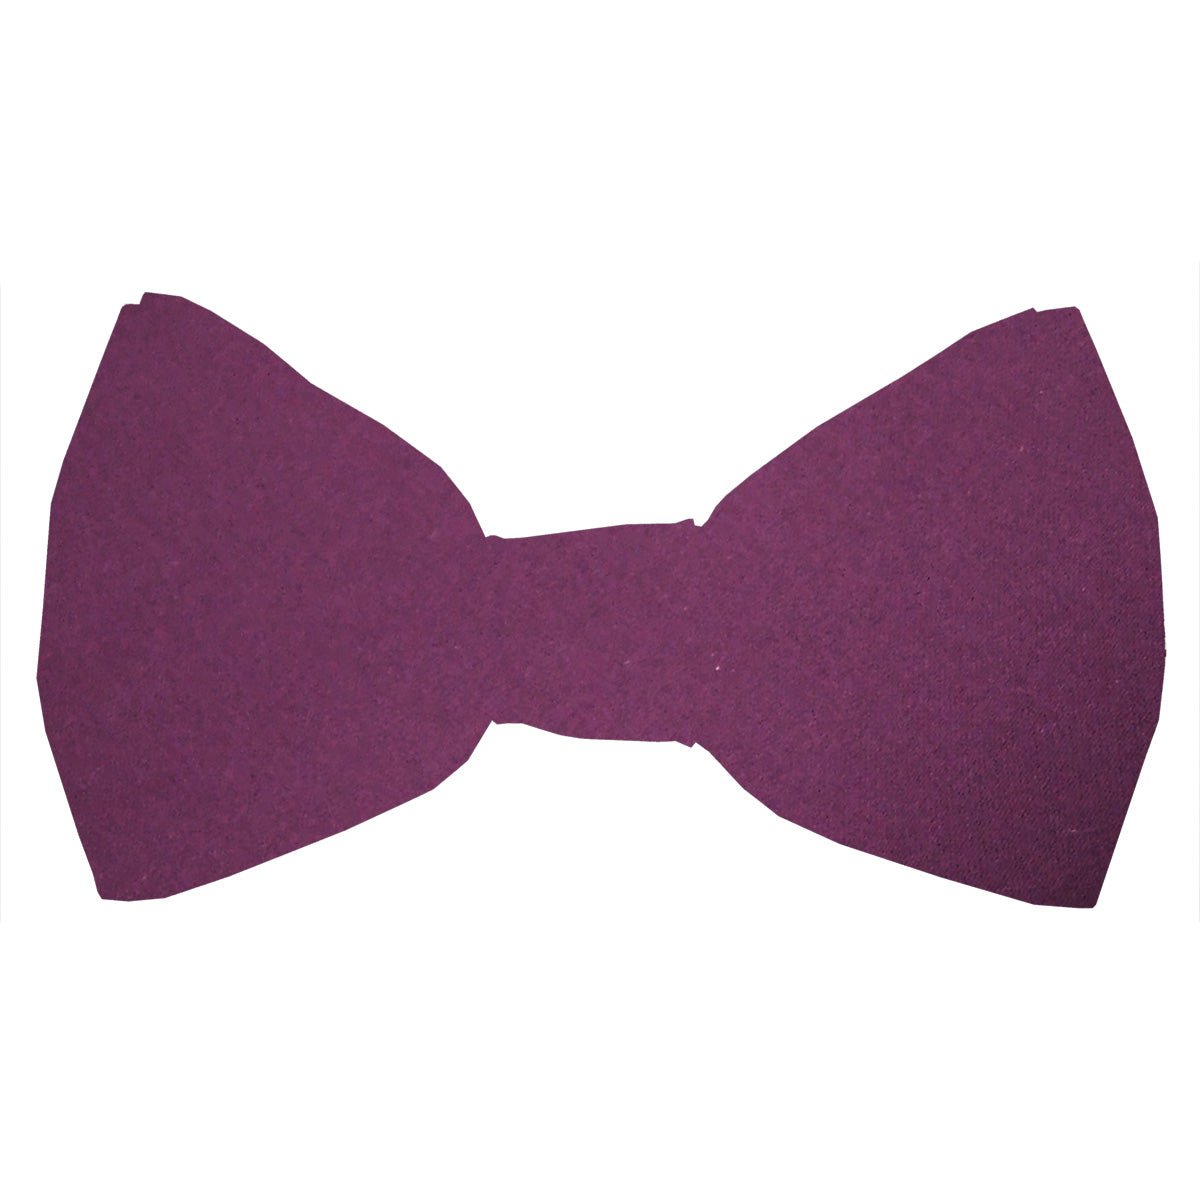 Berry Boys Bow Ties - Childrenswear - Neckstrap - Swagger & Swoon